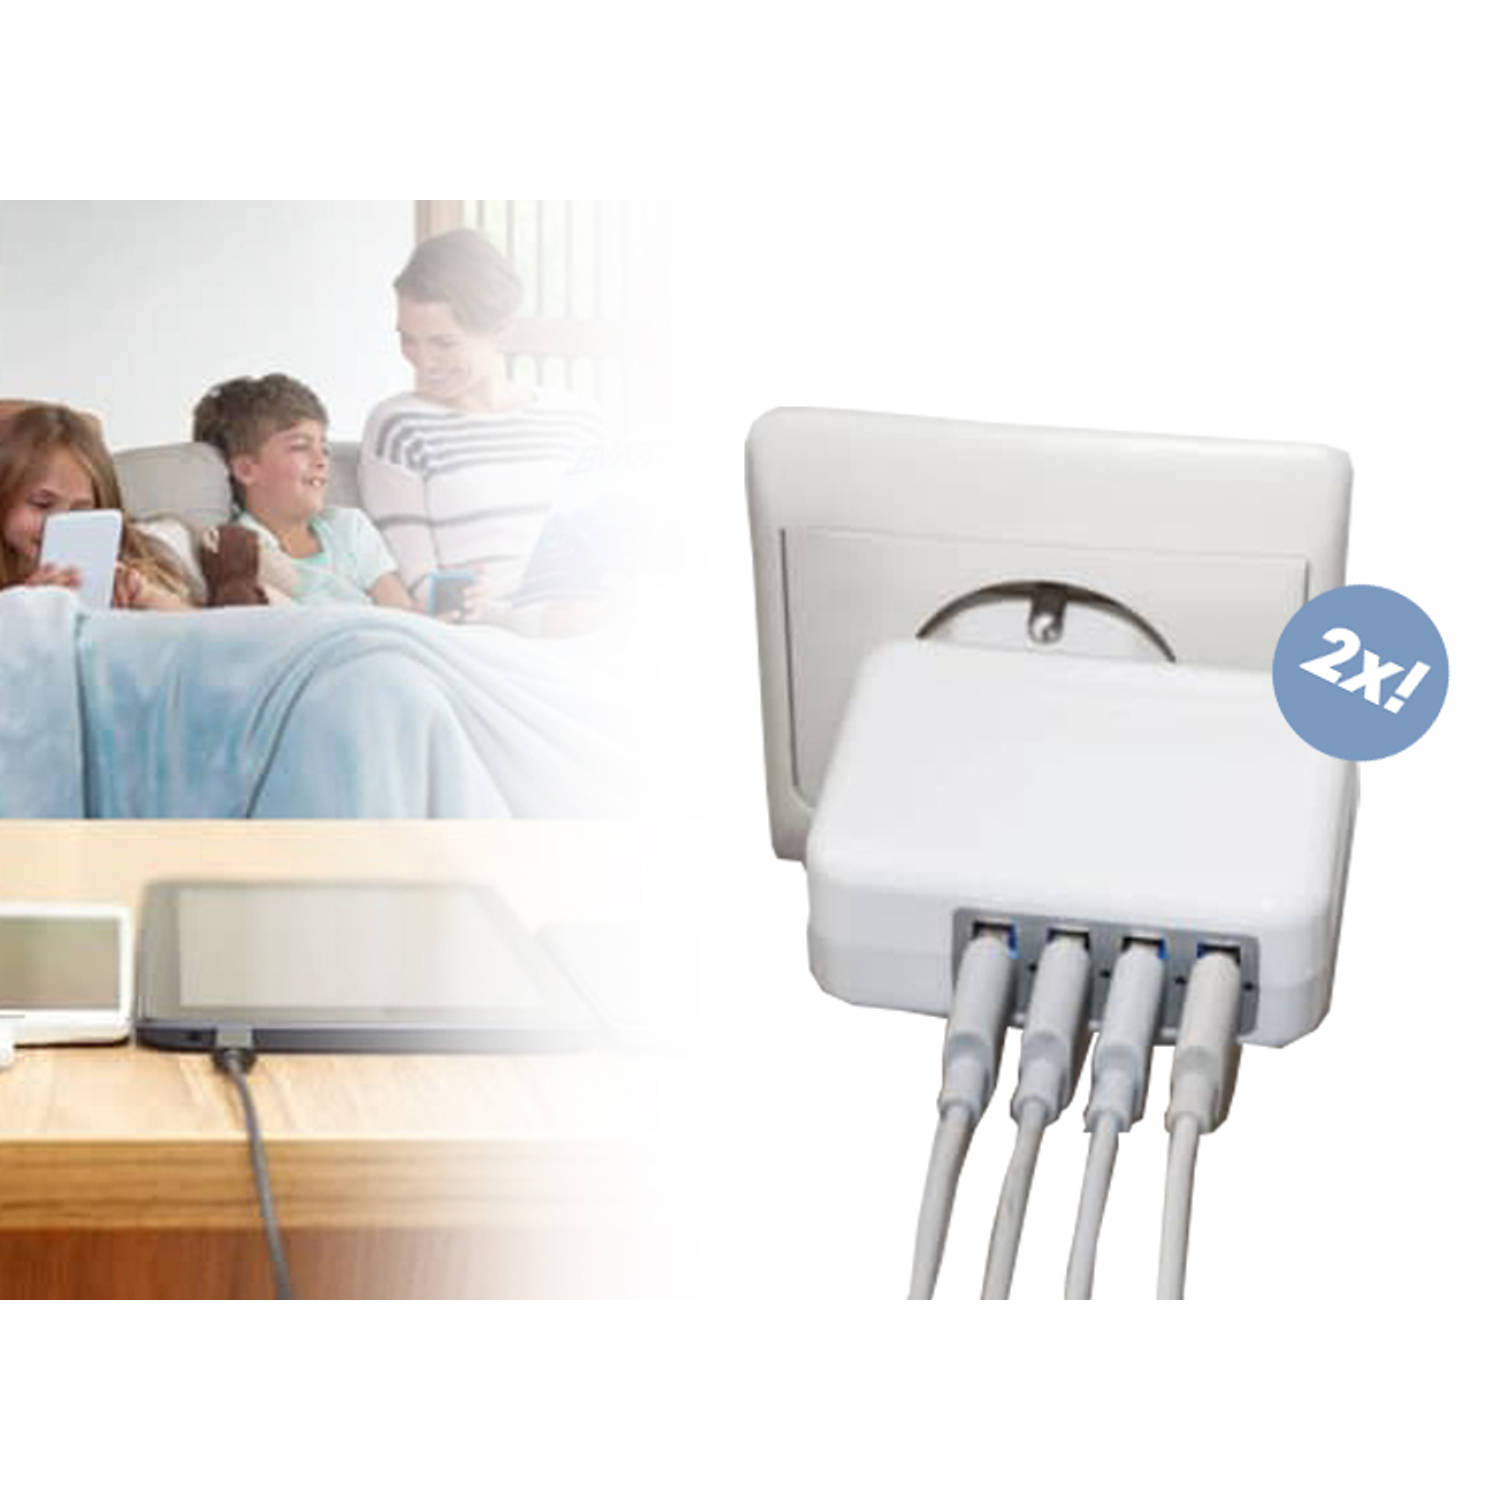 Mr Handsfree 4usb Smart Home Charger 4.5a Duopack